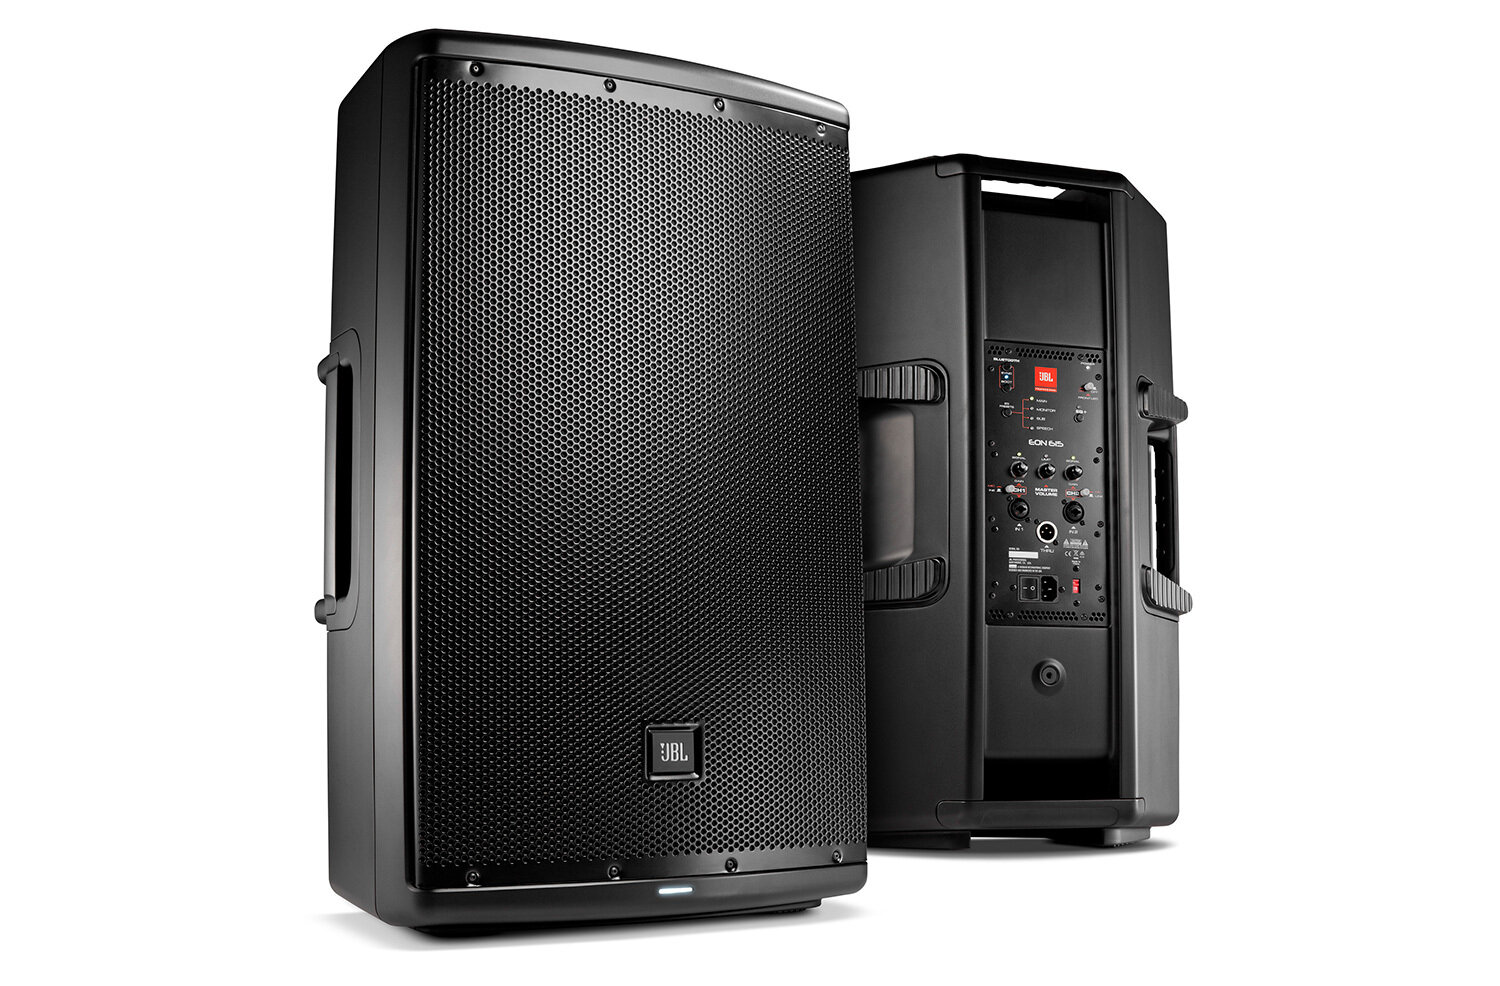 JBL EON615 Two-Way 15" 1000W Powered Portable PA Speaker with Bluetooth Control
#JBEON615 MFR #EON615